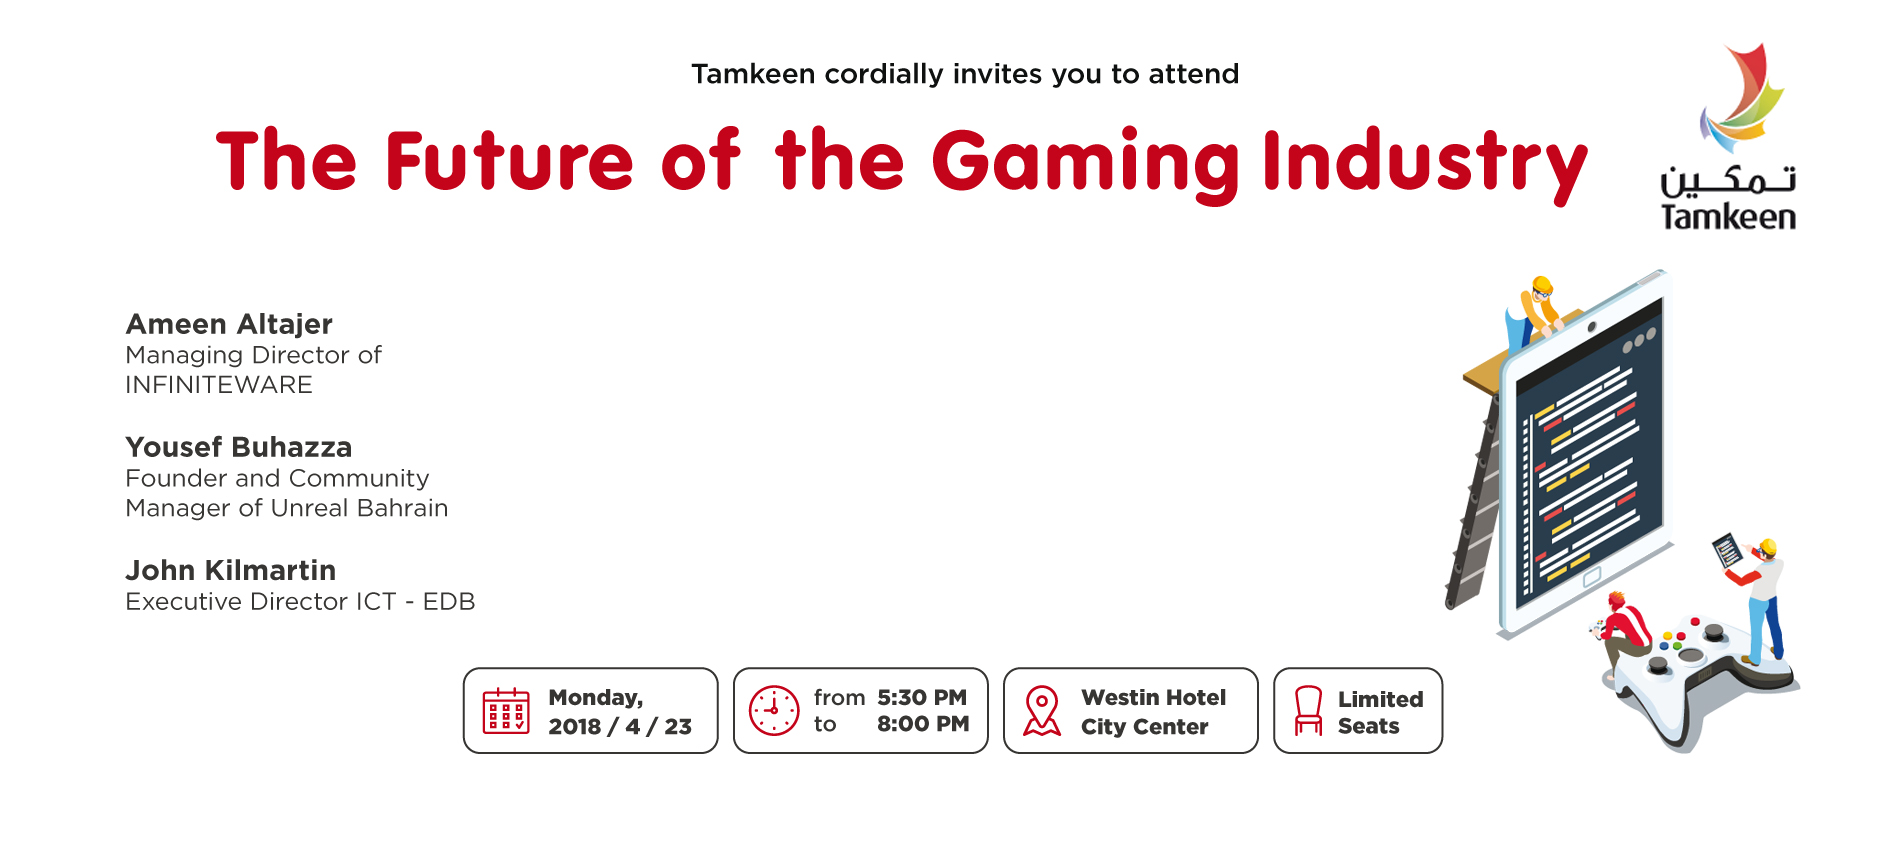 Don’t miss the upcoming Tamkeen Event